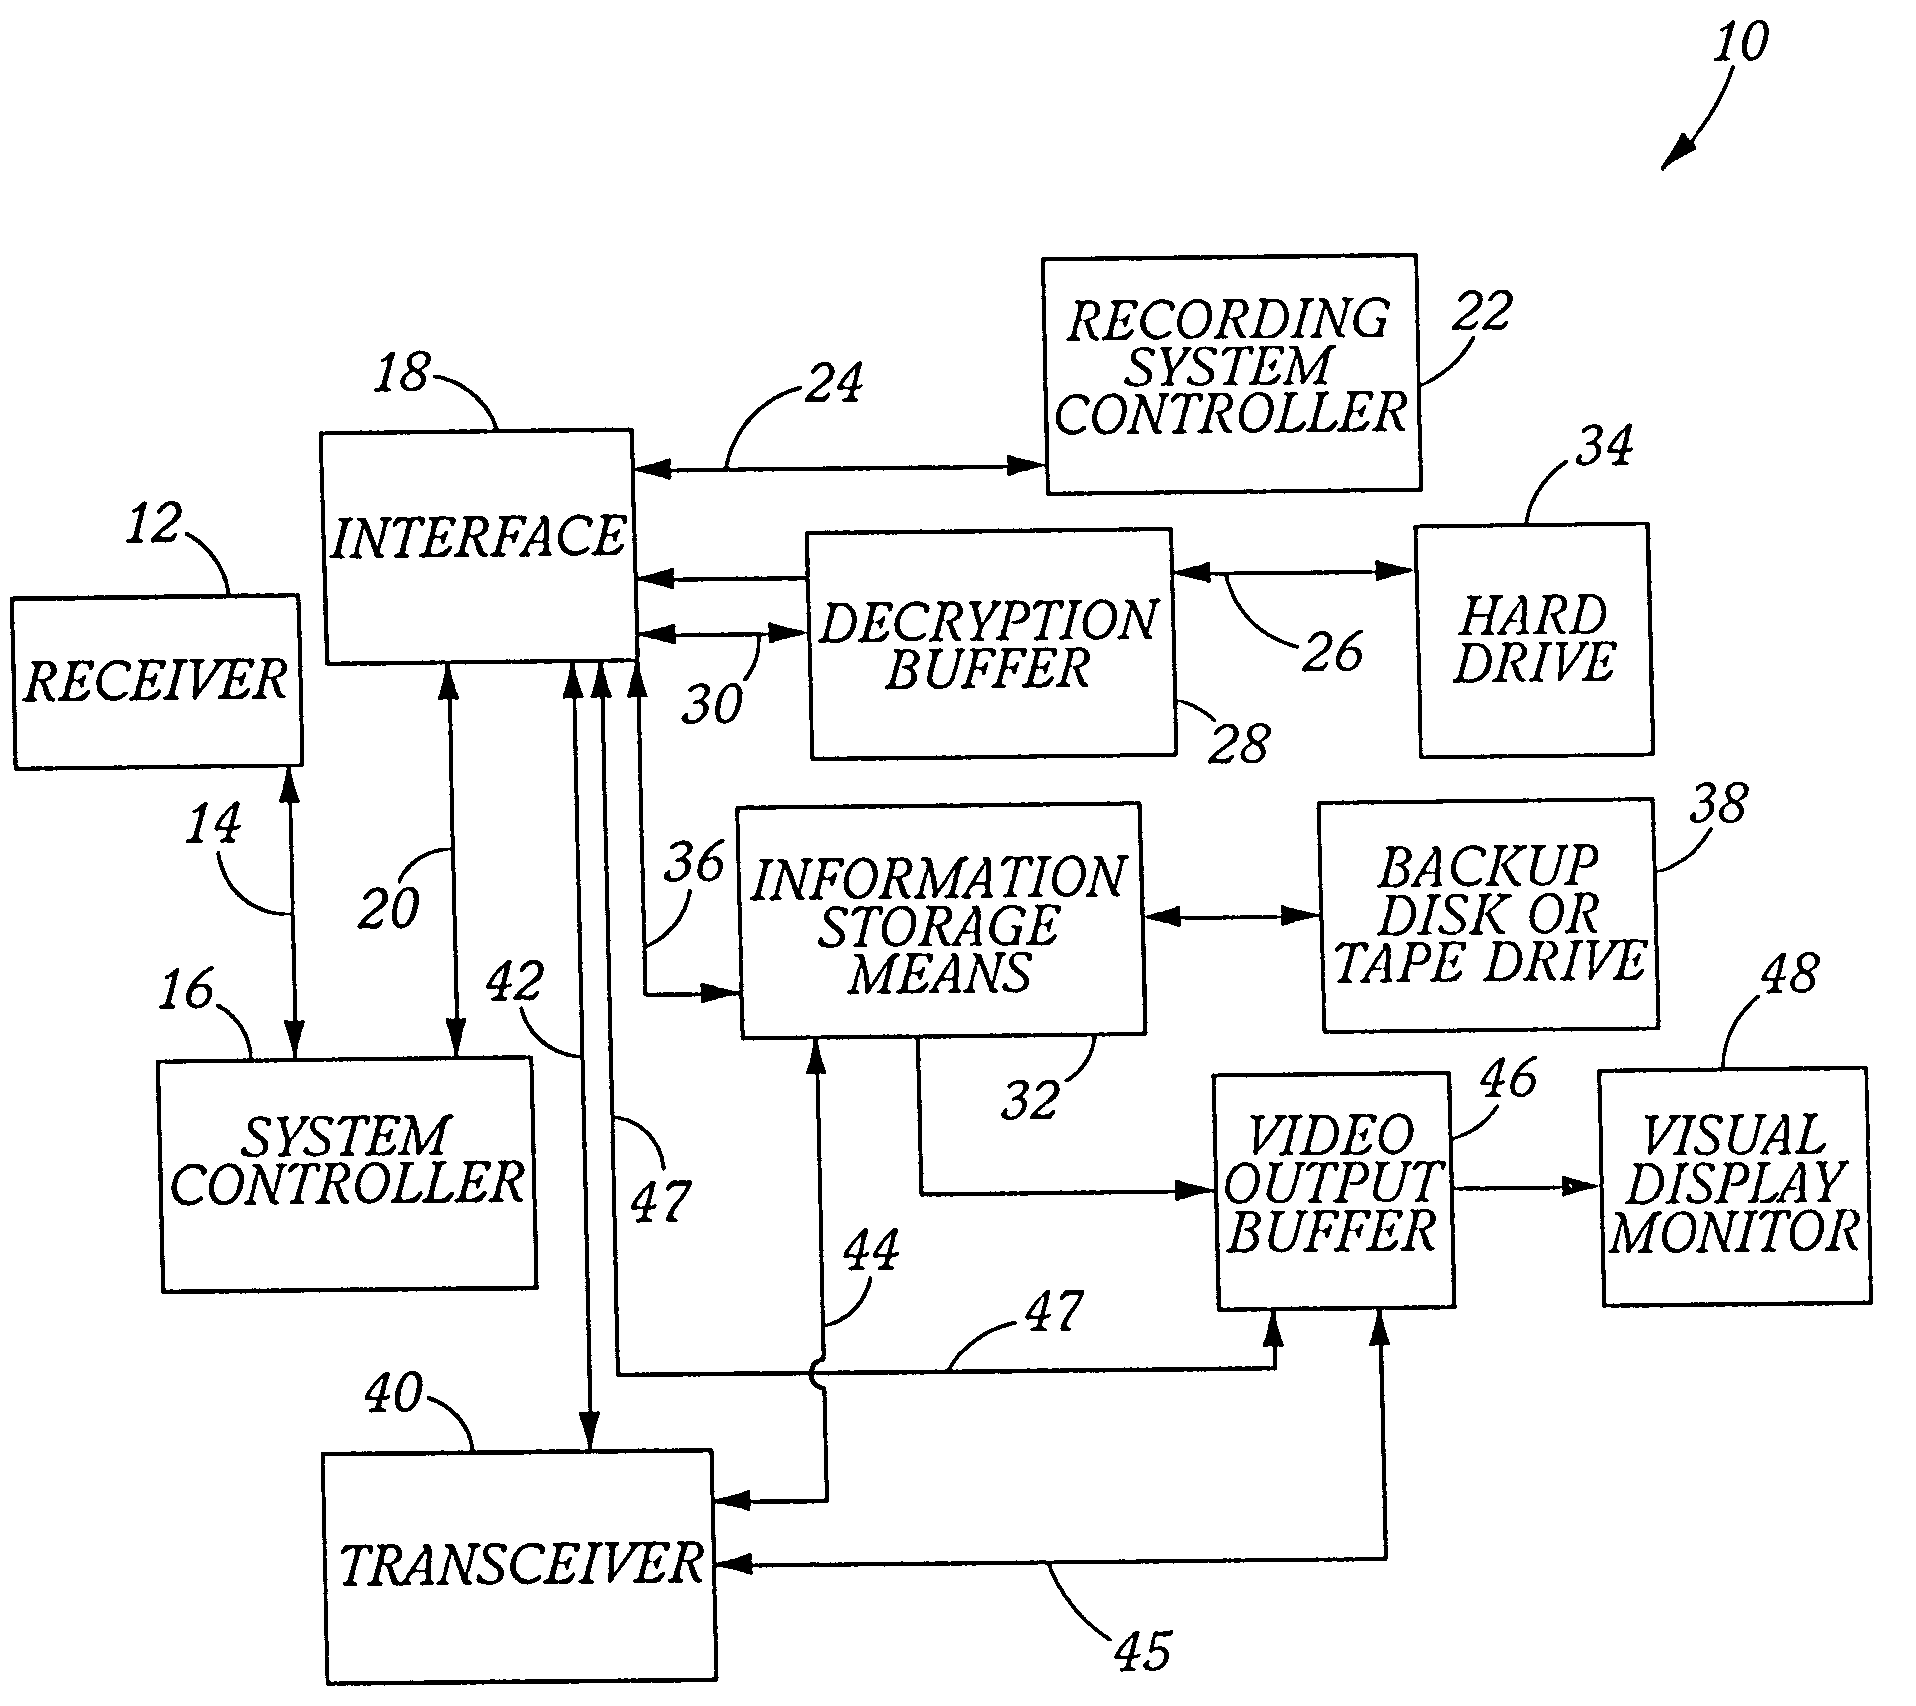 Incident recording information transfer device